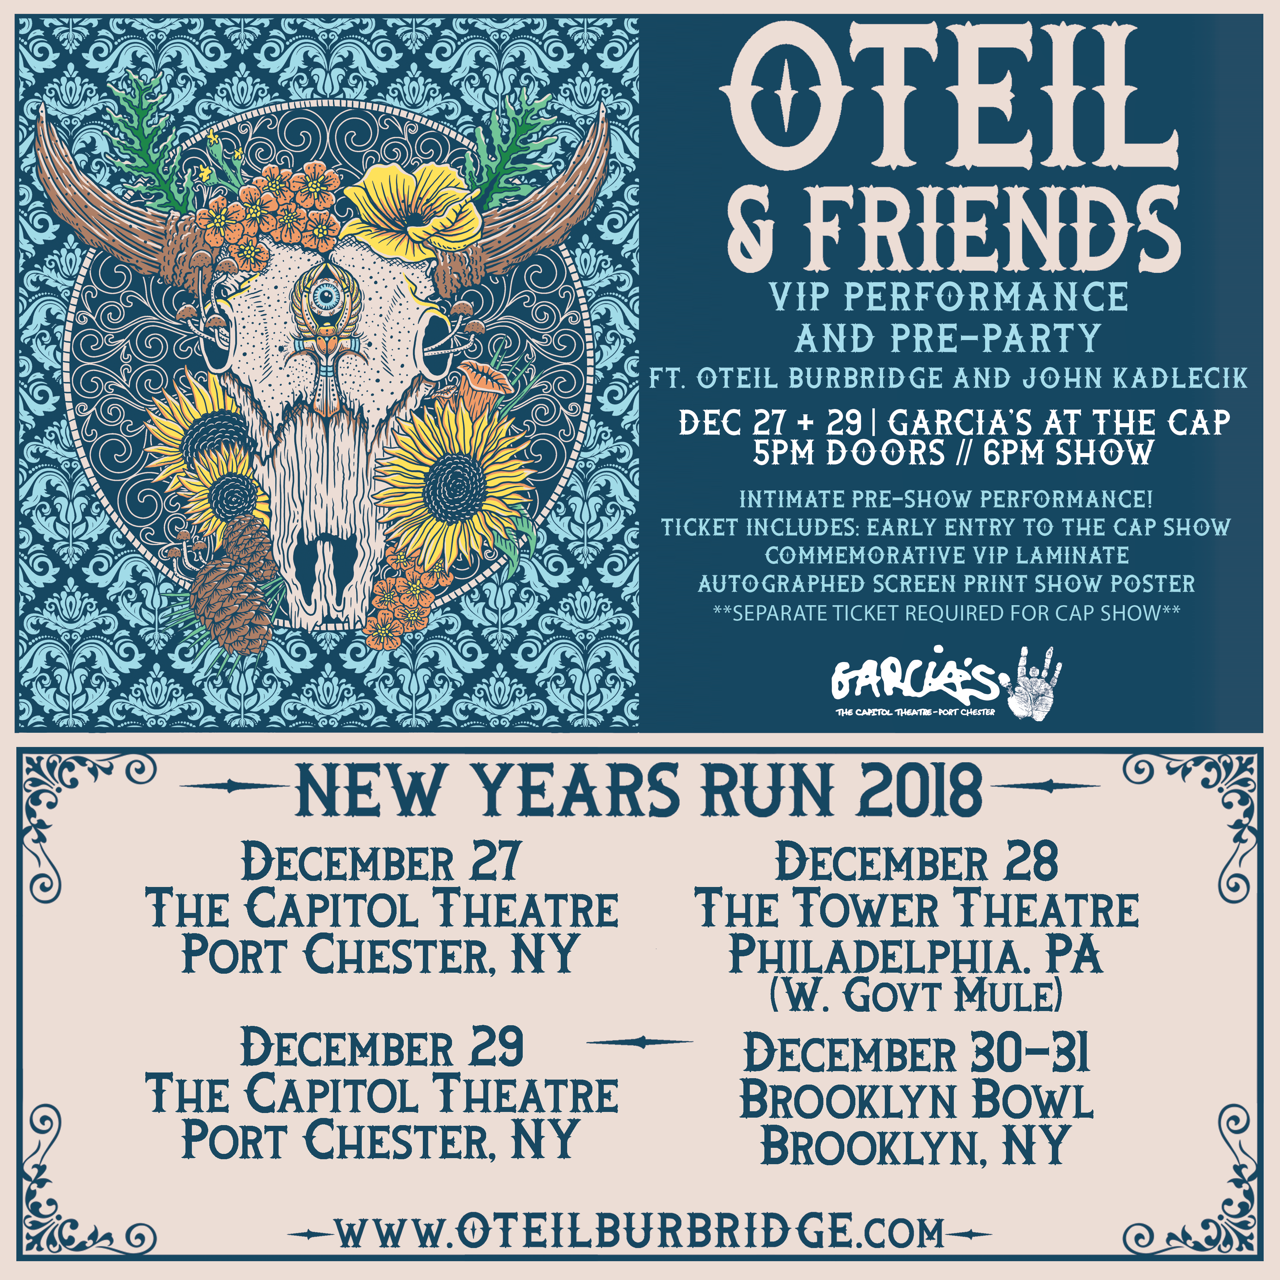 Garcia’s Announces Oteil & Friends VIP Performance and Pre-Party